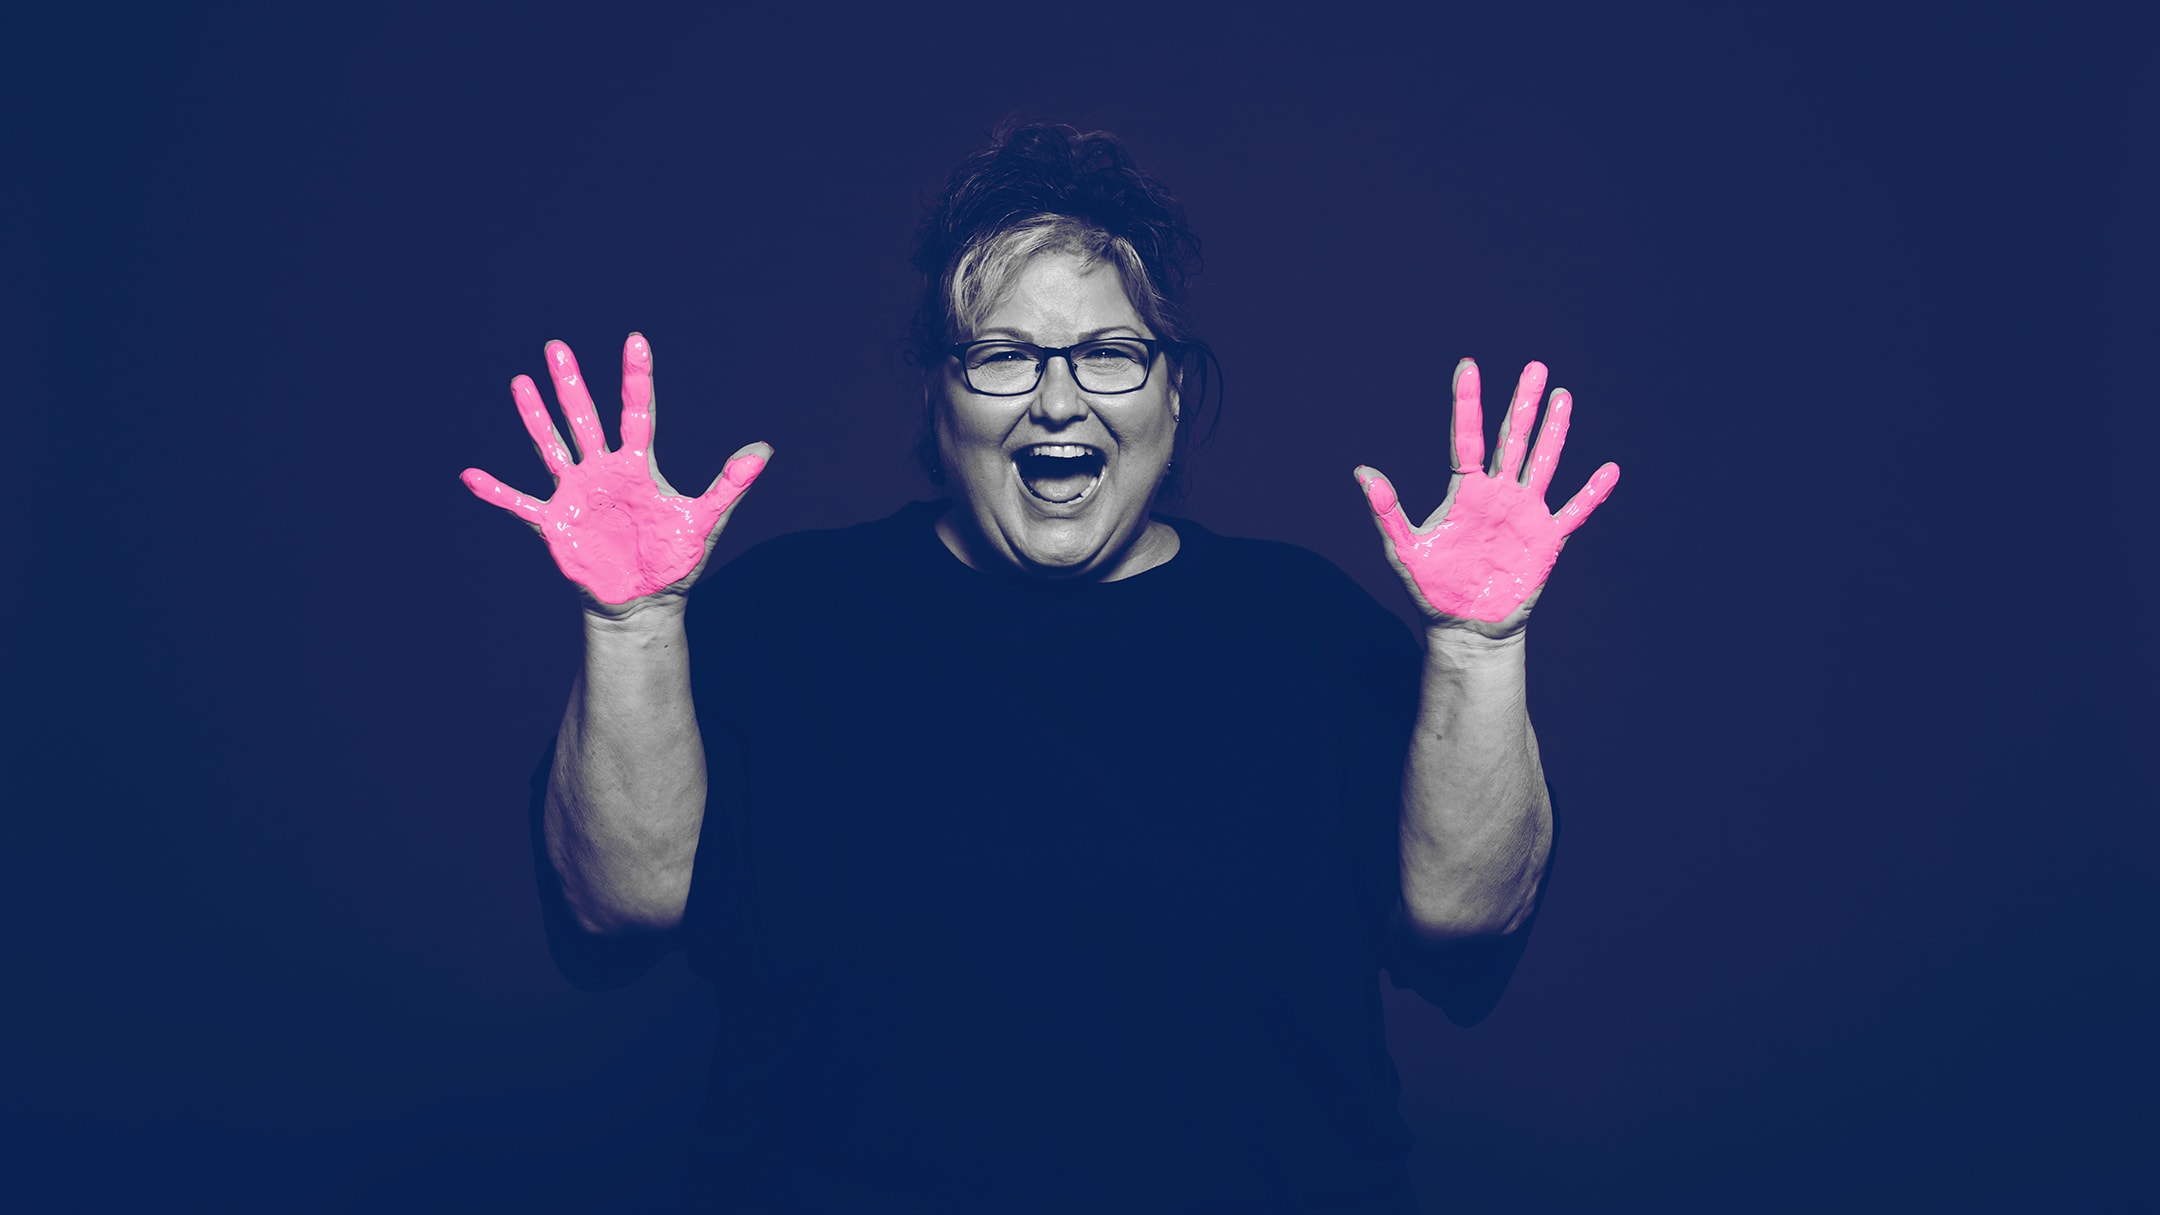 Breast cancer survivor posing for the in our hands campaign with pink paint on her hands